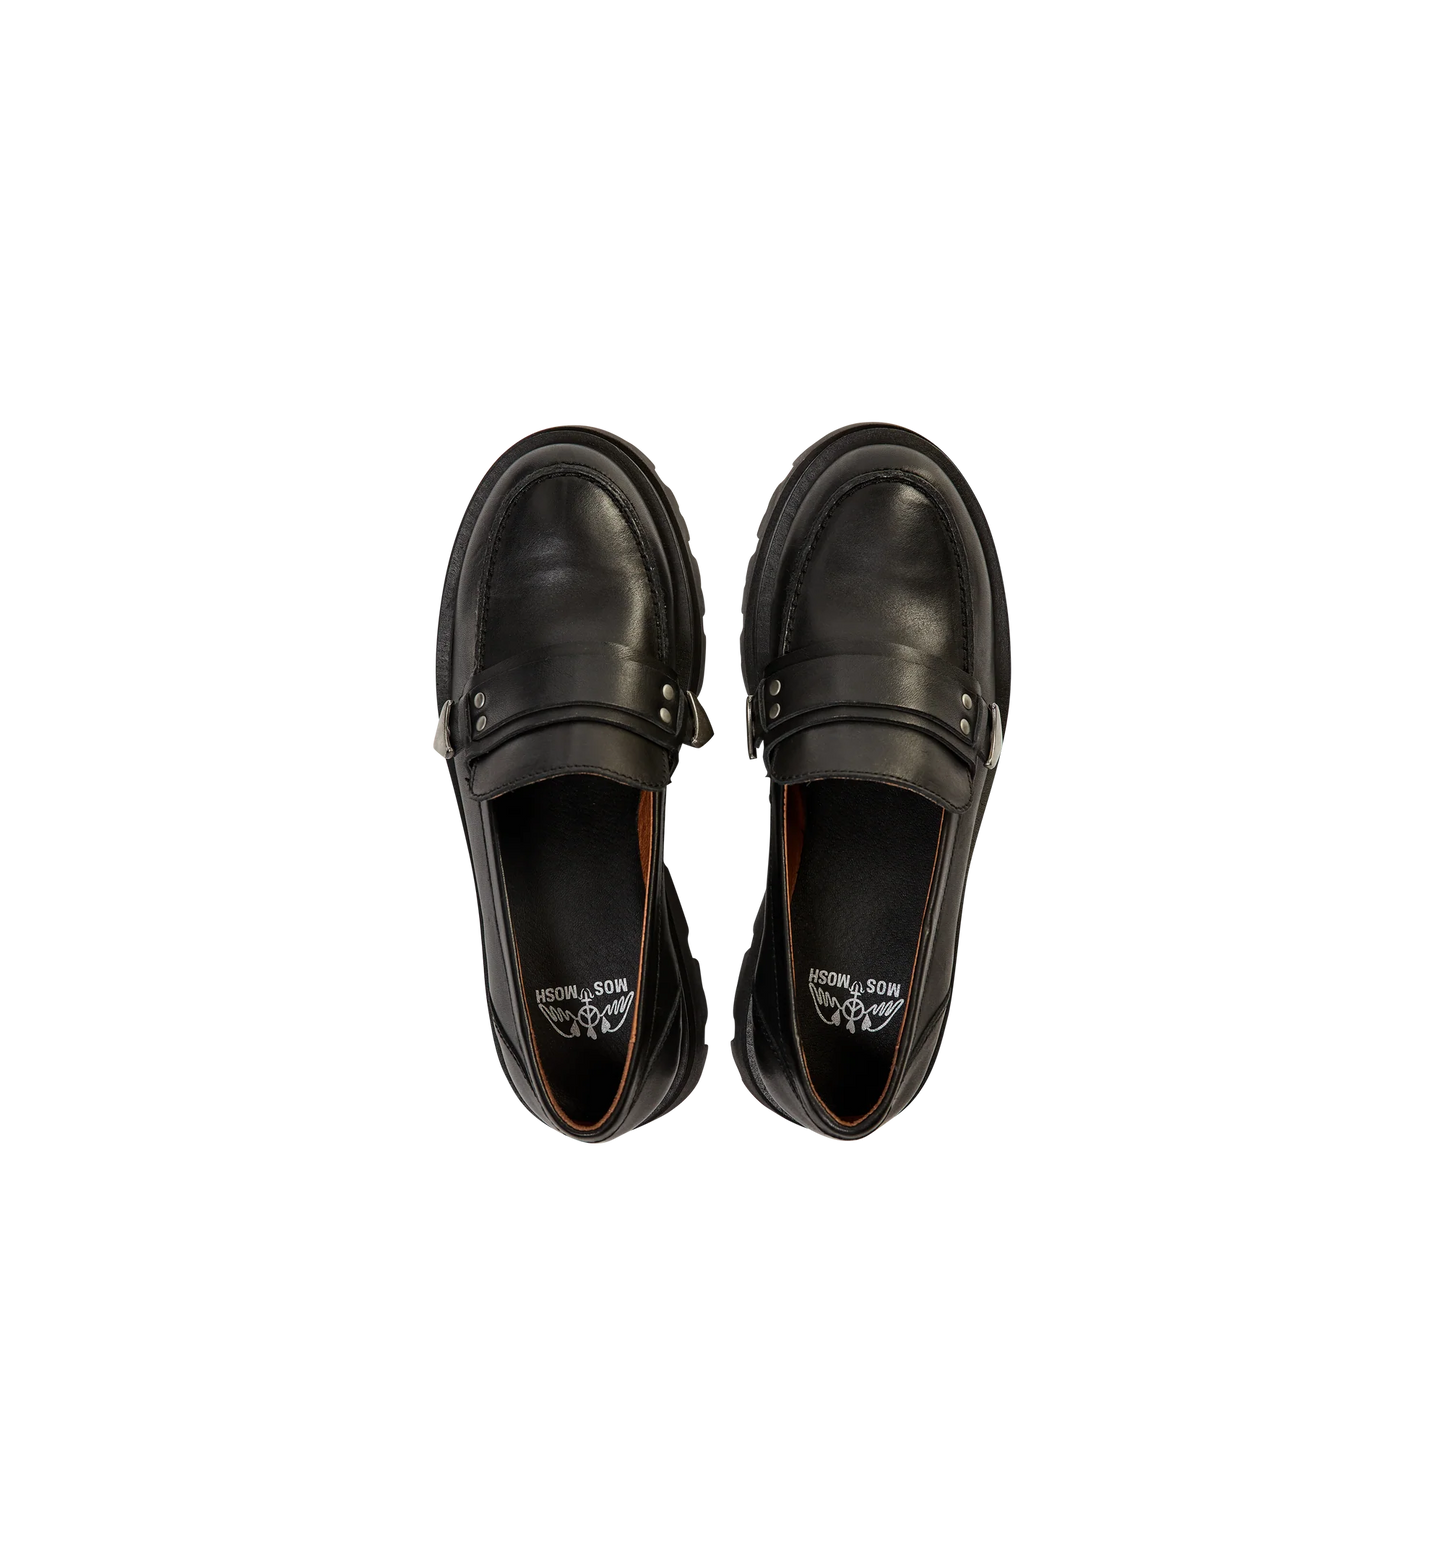 MMCosta Rica Leather Loafer